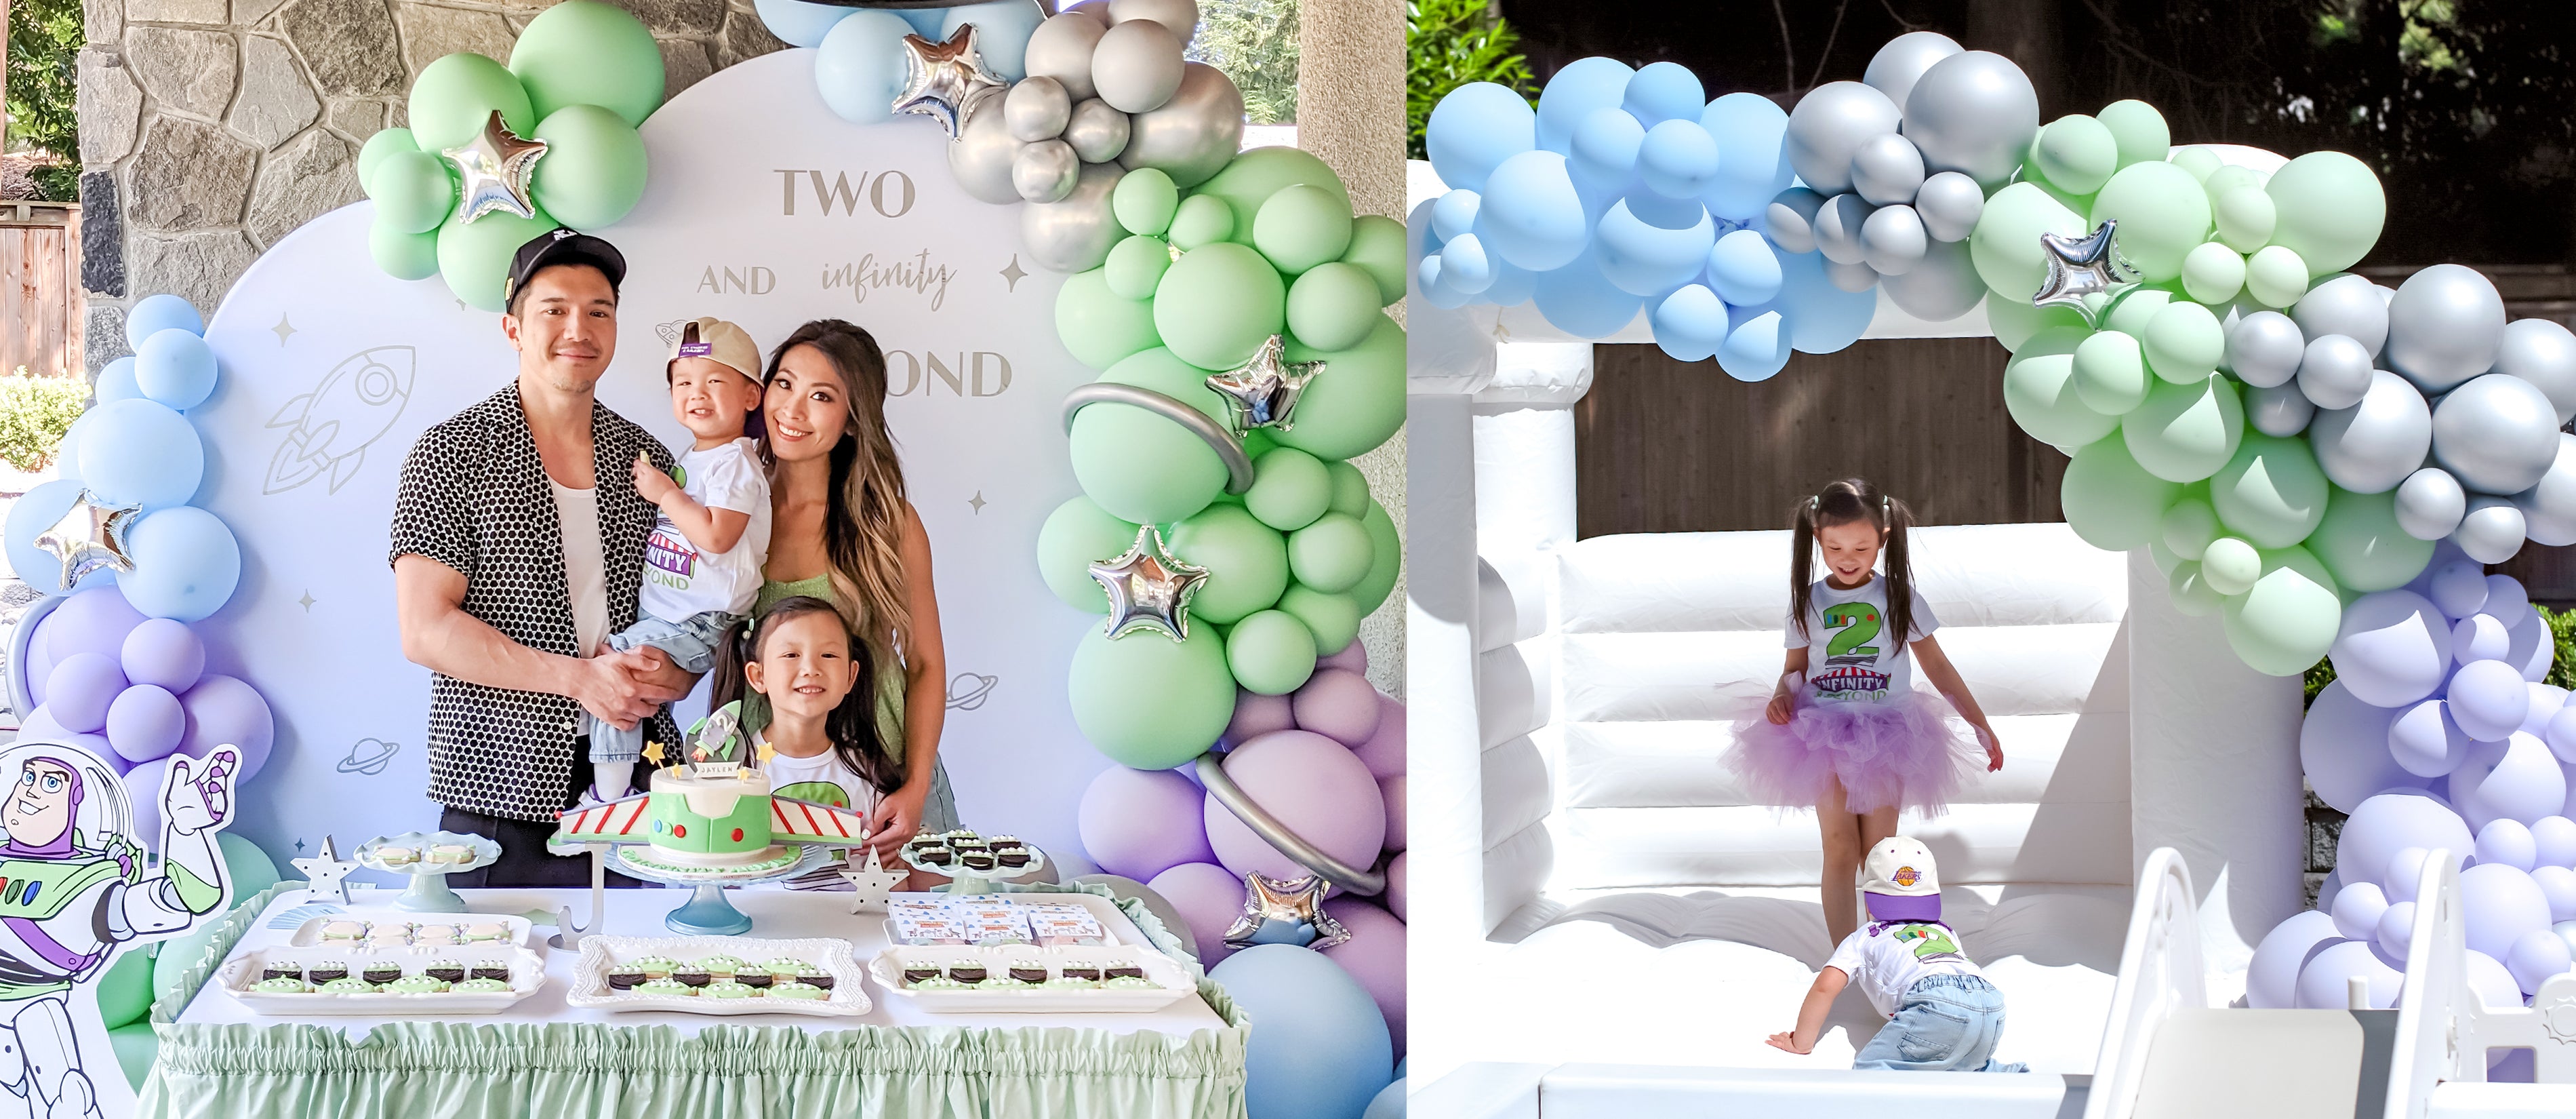 500+ affordable balloon garland For Sale